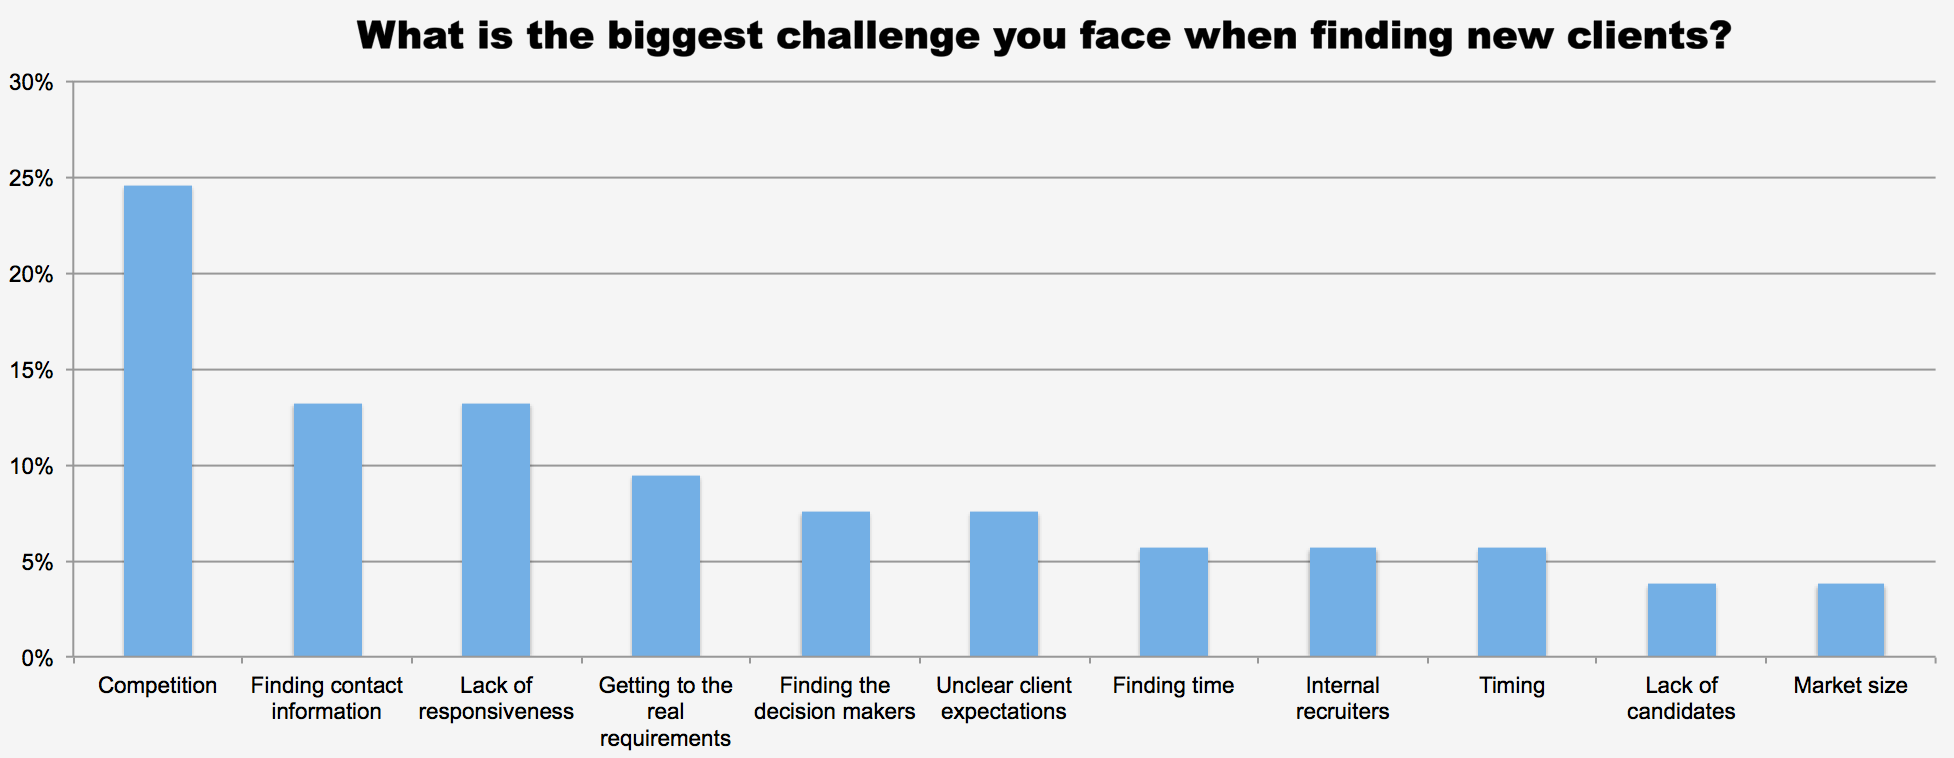 What is the biggest challenge you face when finding new clients?